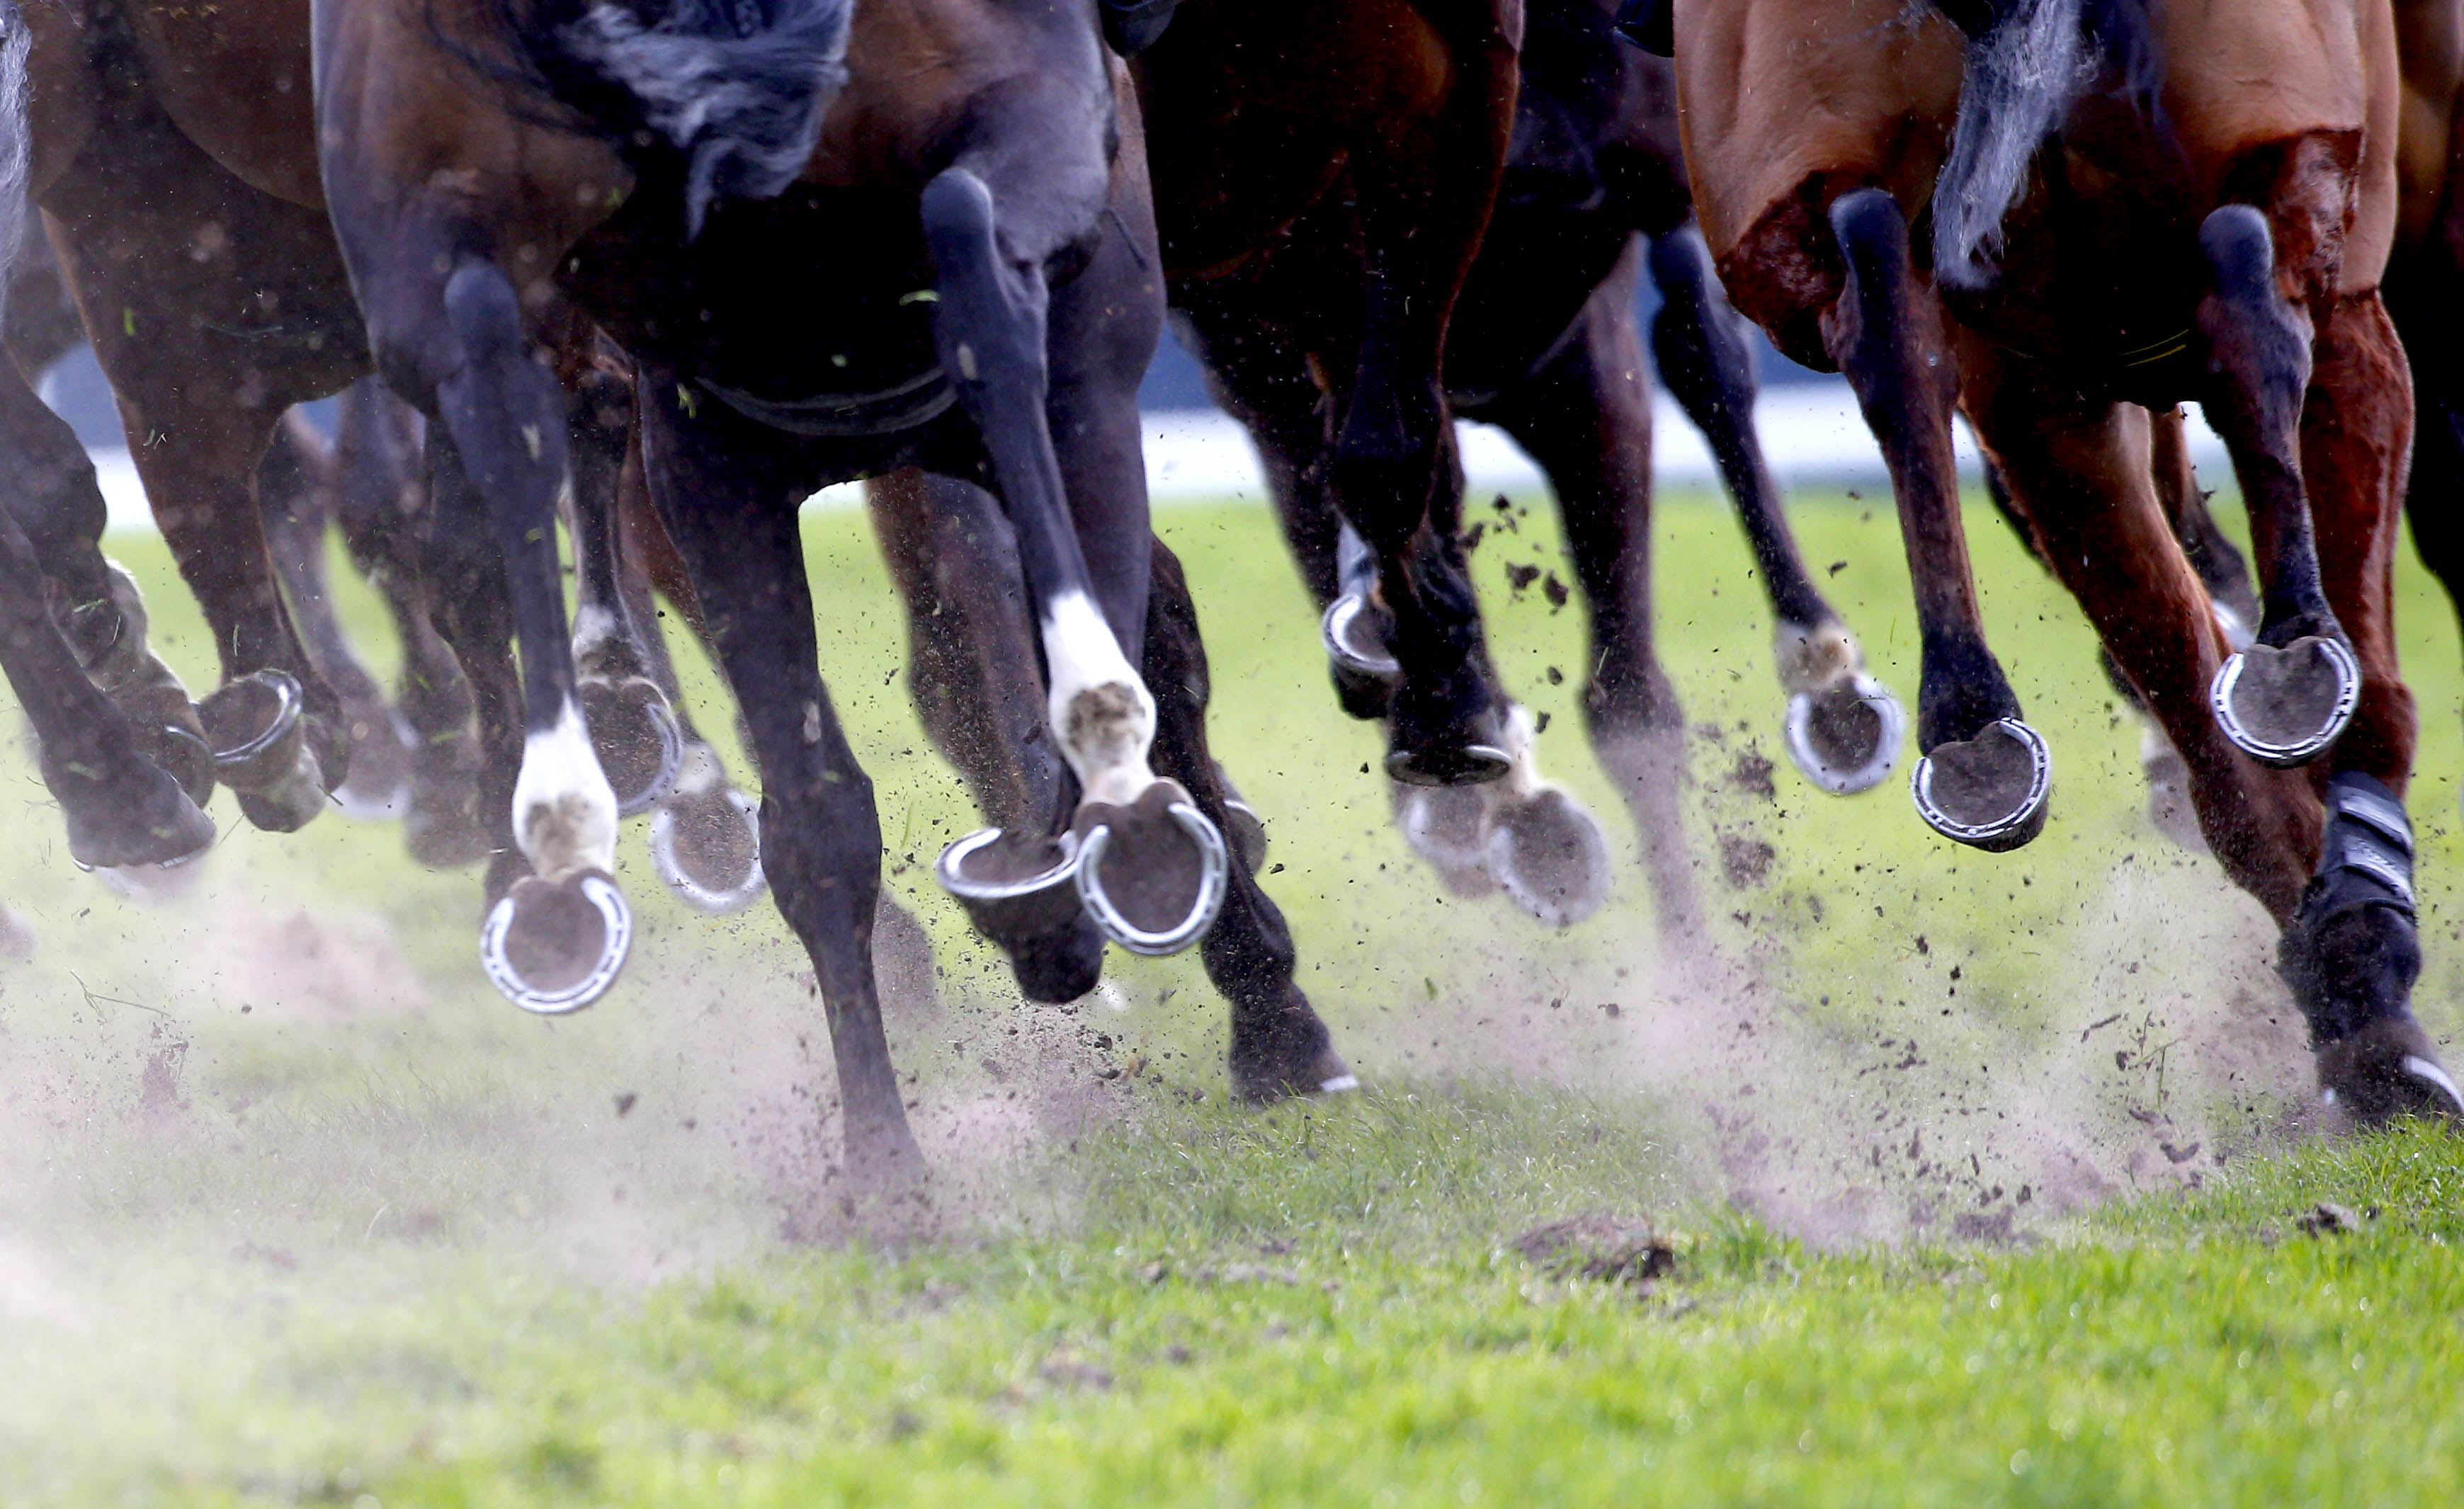 Trial announced for innovative new ‘hybrid’ race | British Horseracing ...